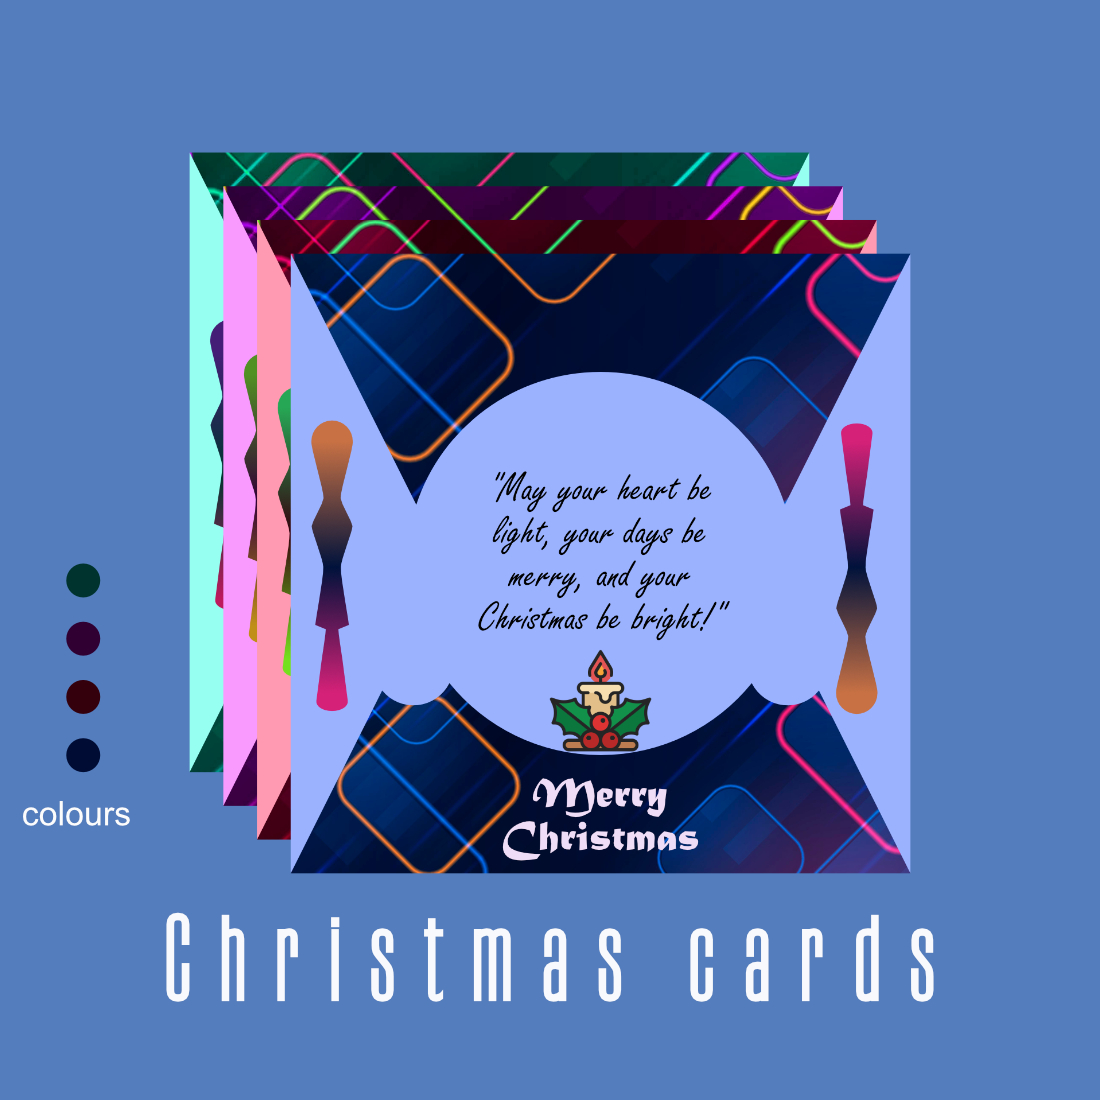 6+ Beautiful Background Christmas Cards with Inspiring Christmas Wishes preview image.